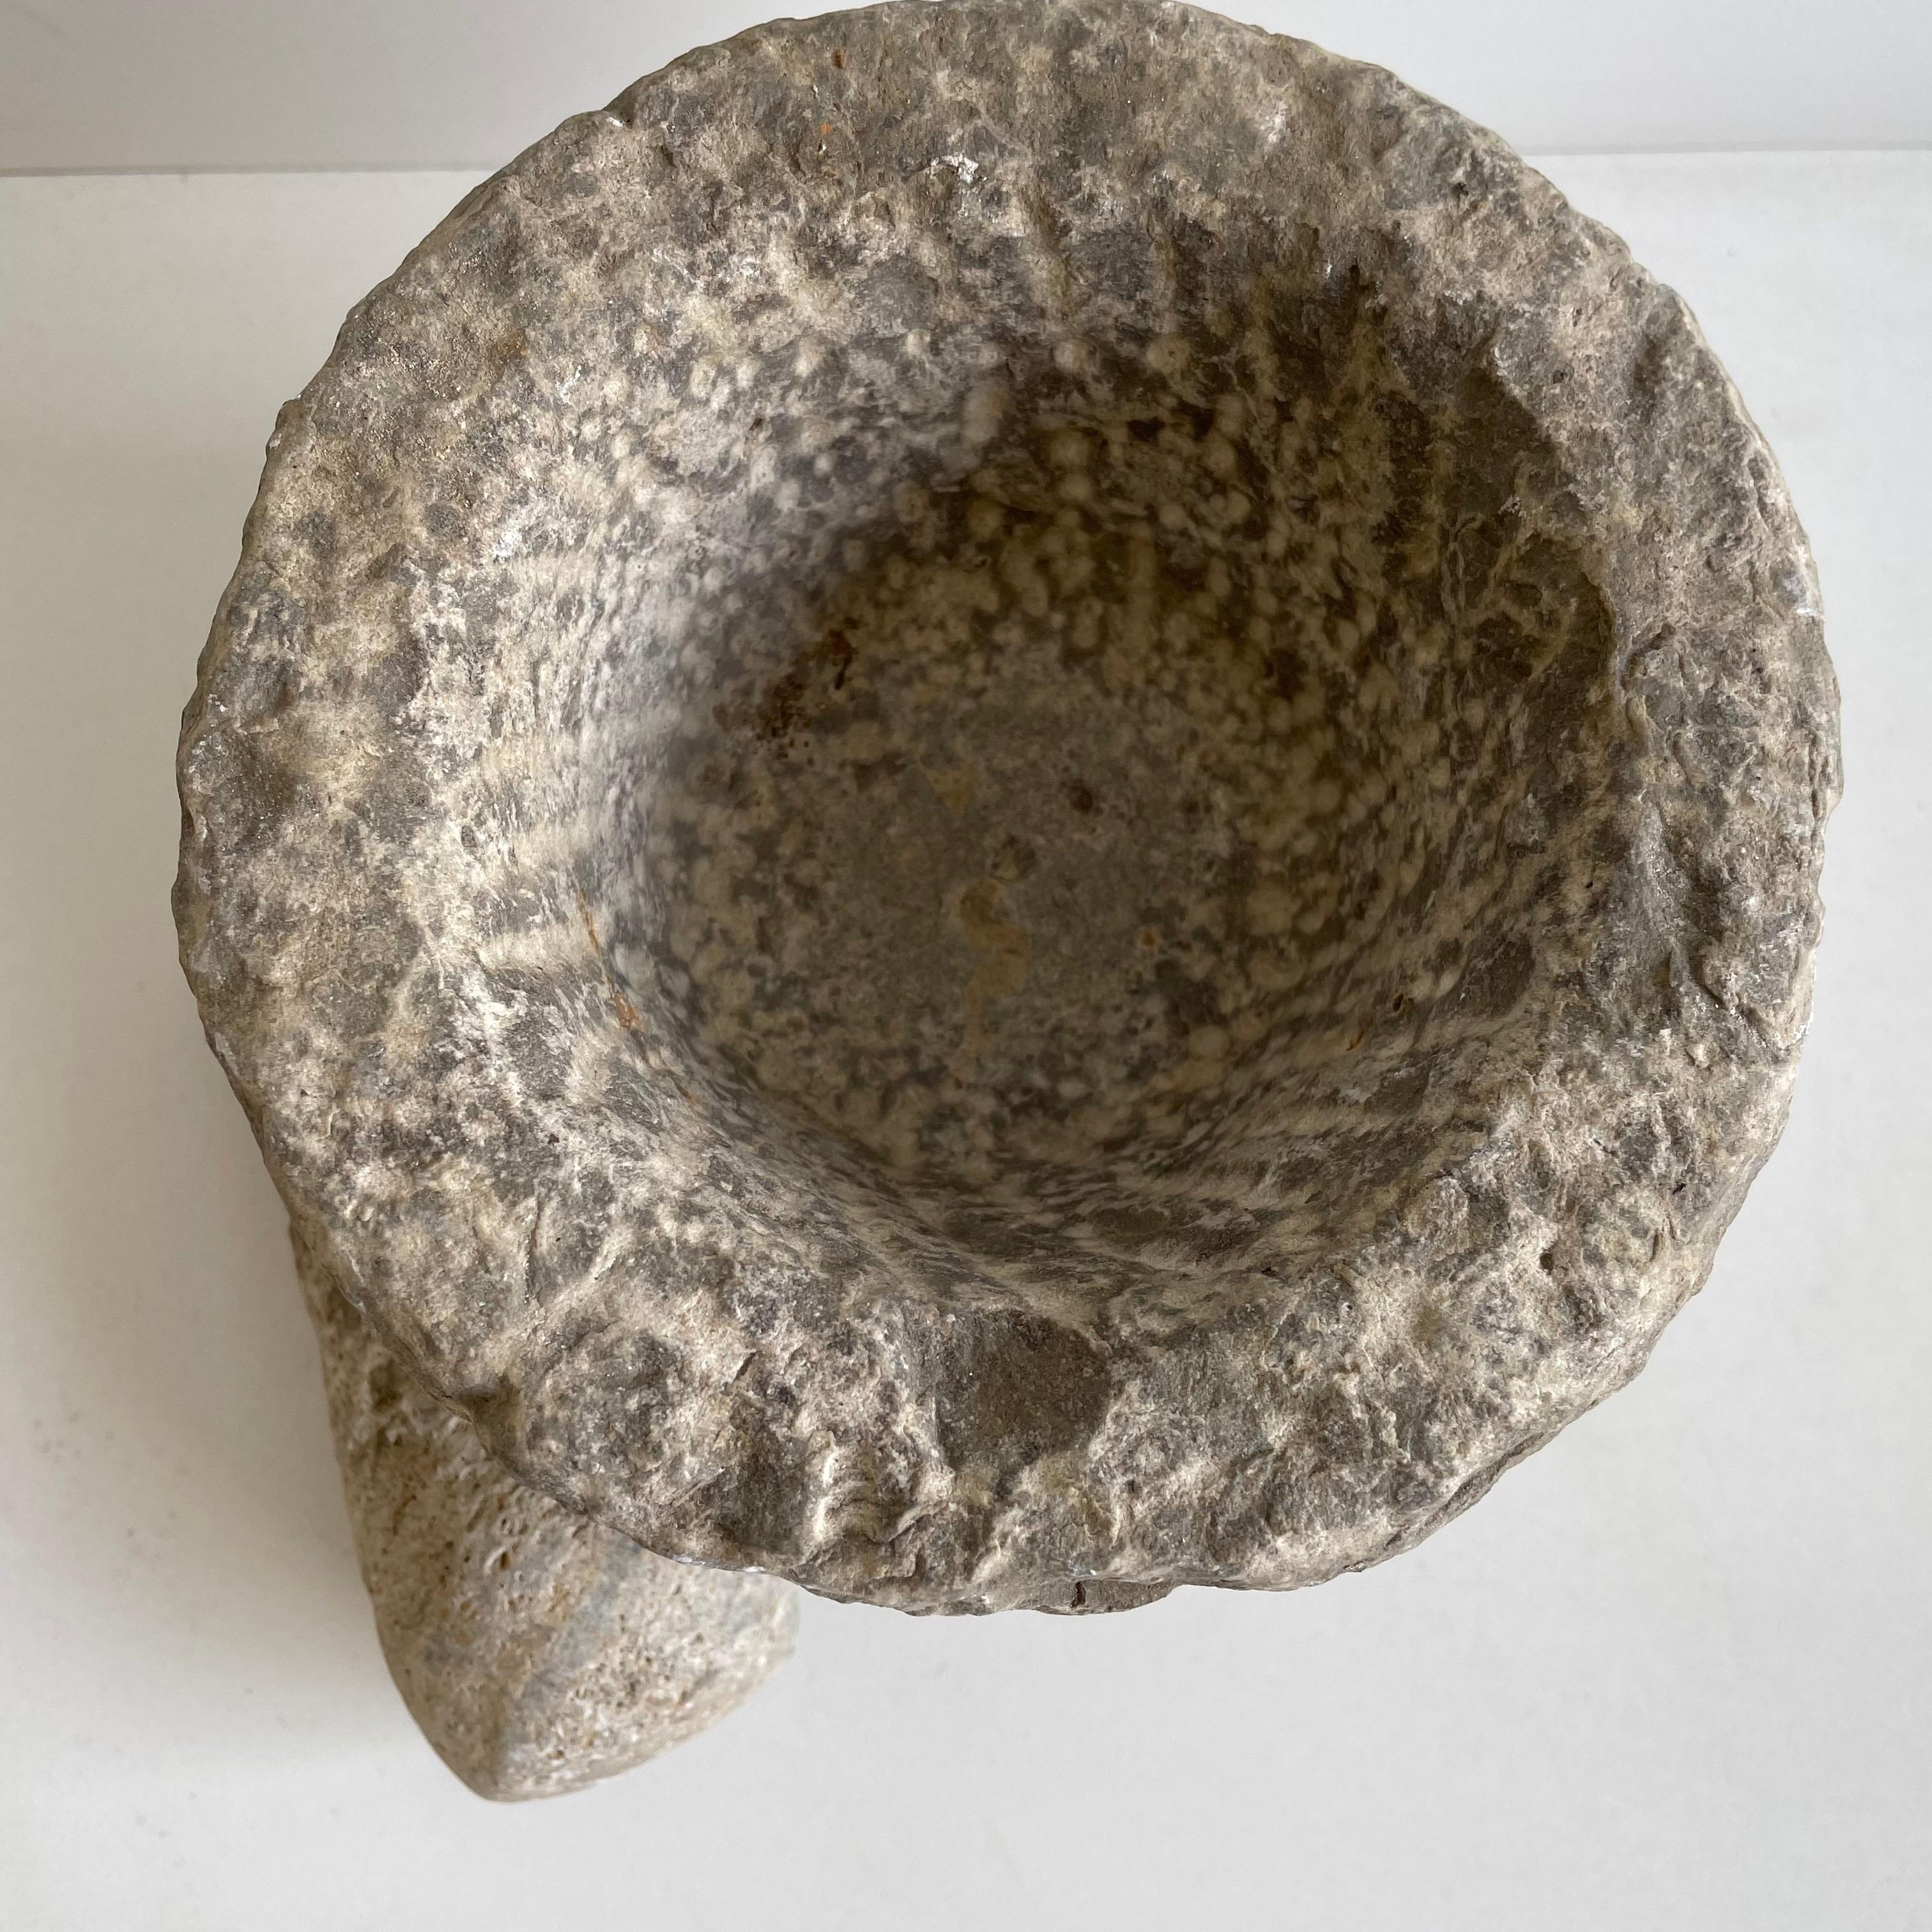 Antique stone mortar and pestle bowl set

Antique stone mortar and pestle bowl set, great decorative item, or can be used.
Accessories not included
Size: 6 x 6 x 4.